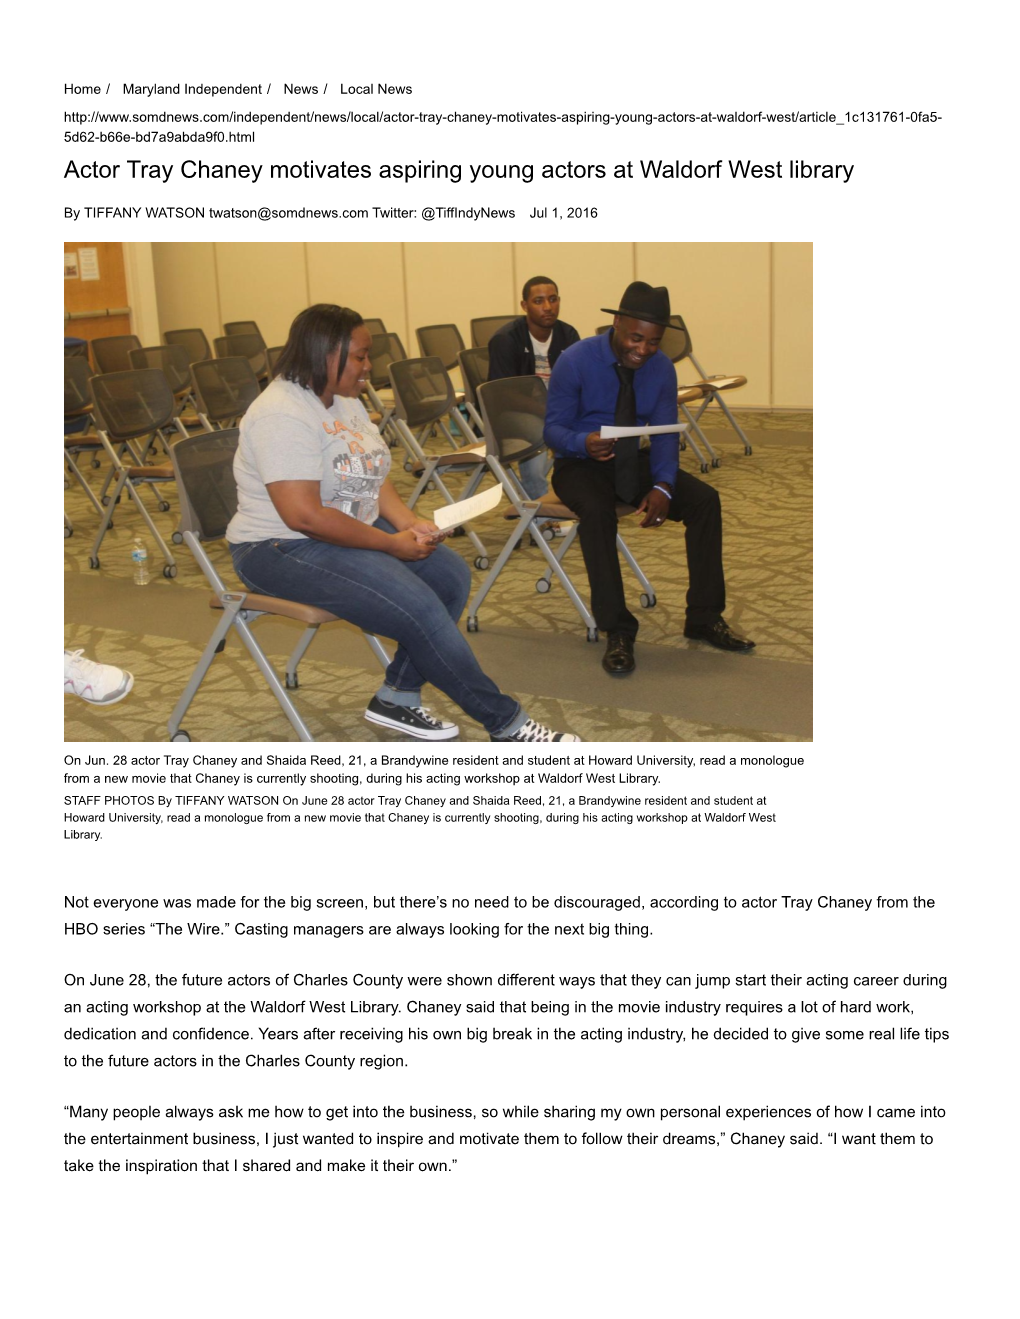 Actor Tray Chaney Motivates Aspiring Young Actors at Waldorf West Library